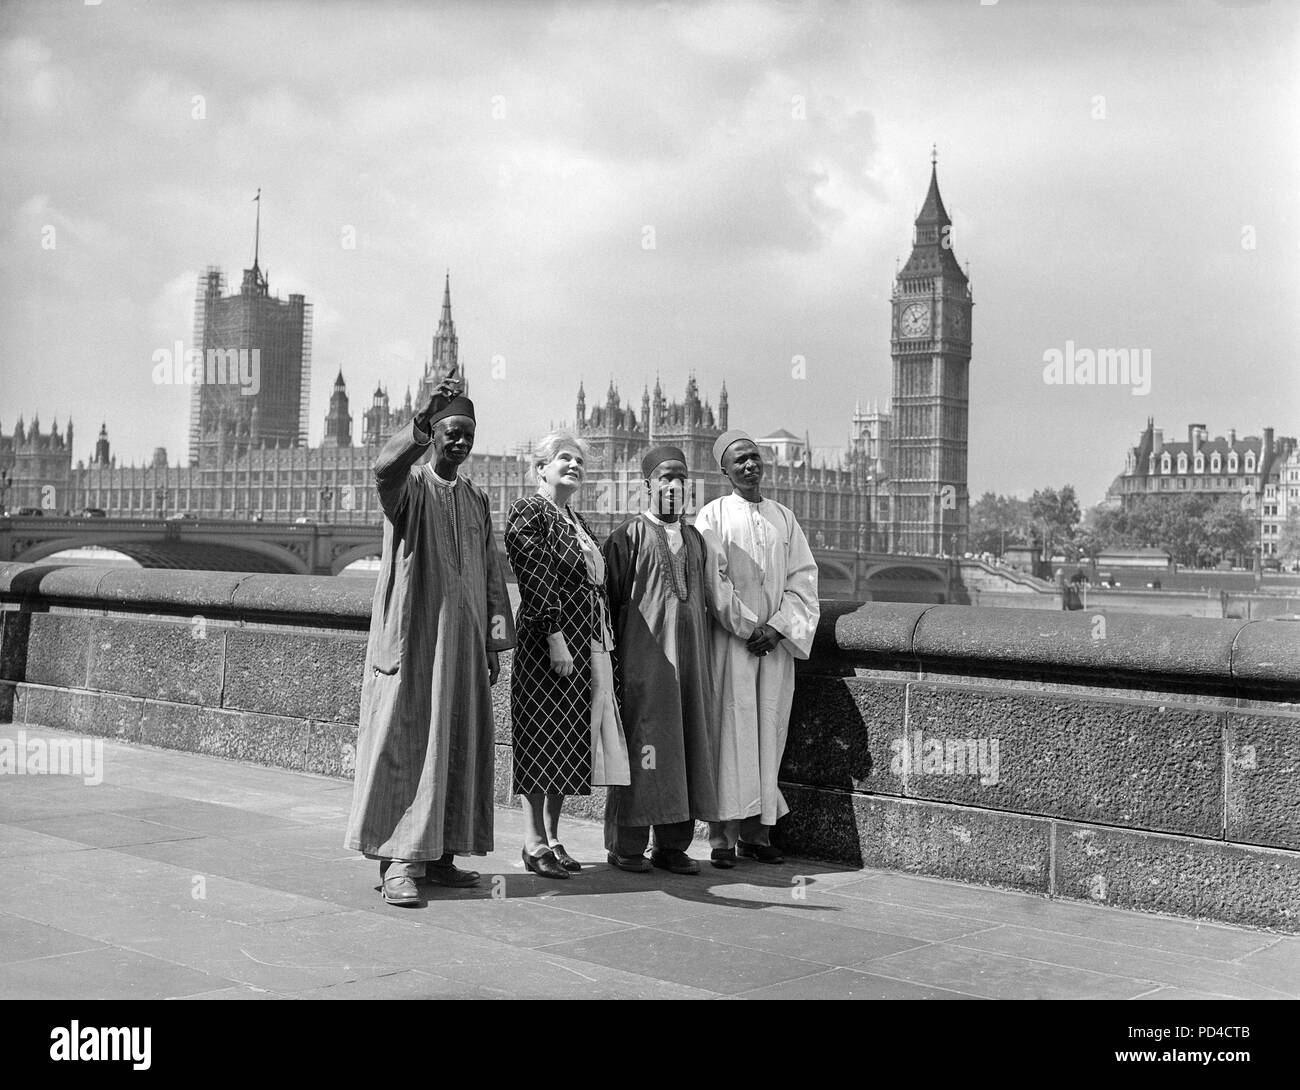 19th July 1950. London. England. Paramount Chiefs from Sierra Leone Jaia Kaikai, Kai Samba, and Alkali Inodu III, take a look at the view from the terrace of County Hall, during a visit to the headquarters of the London County Council. With the chiefs is Mrs. Helen C. Bentwich, Vice-Chairman of the Council. In the background can be seen the Houses of Parliament and Big Ben, across the river. The chiefs made the six week visit to Britain under the auspices of the British Council to see something of life in Britain. Stock Photo